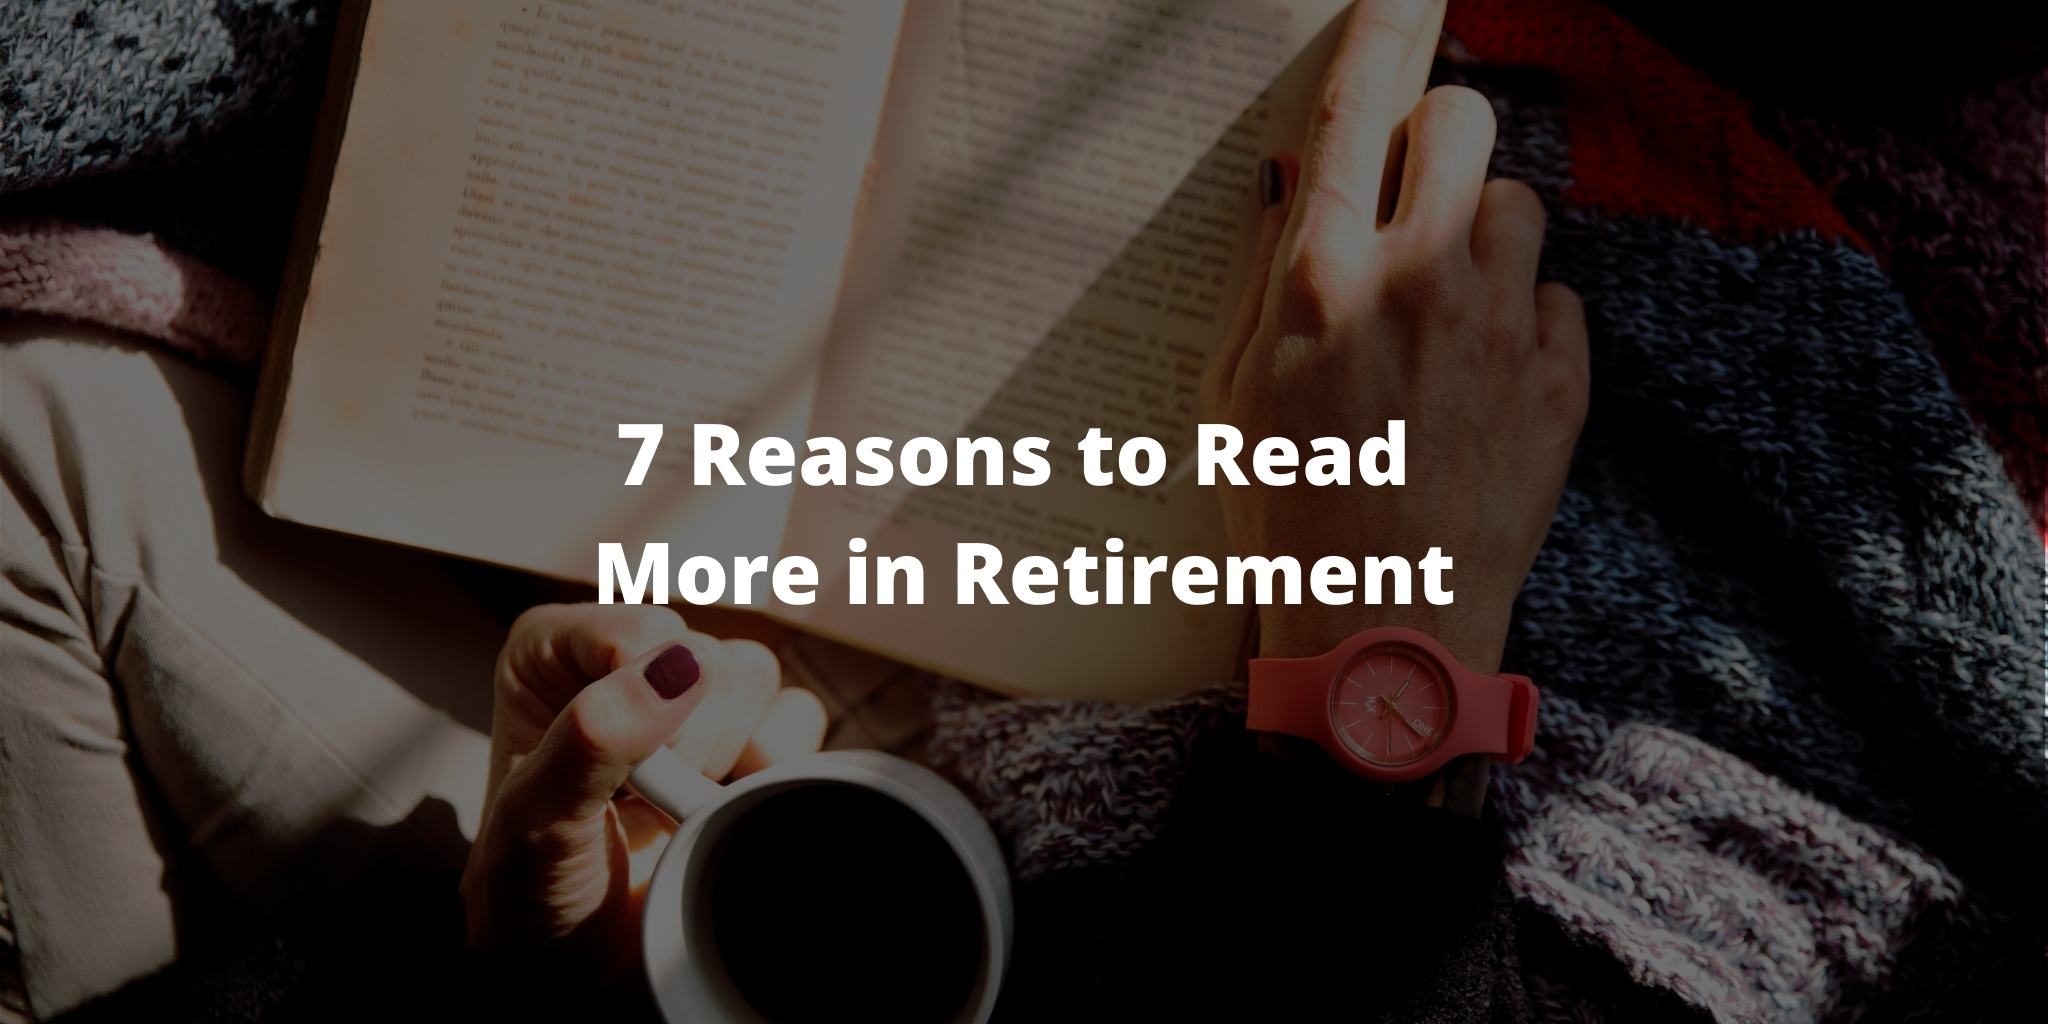 7 Reasons to Read More in Retirement